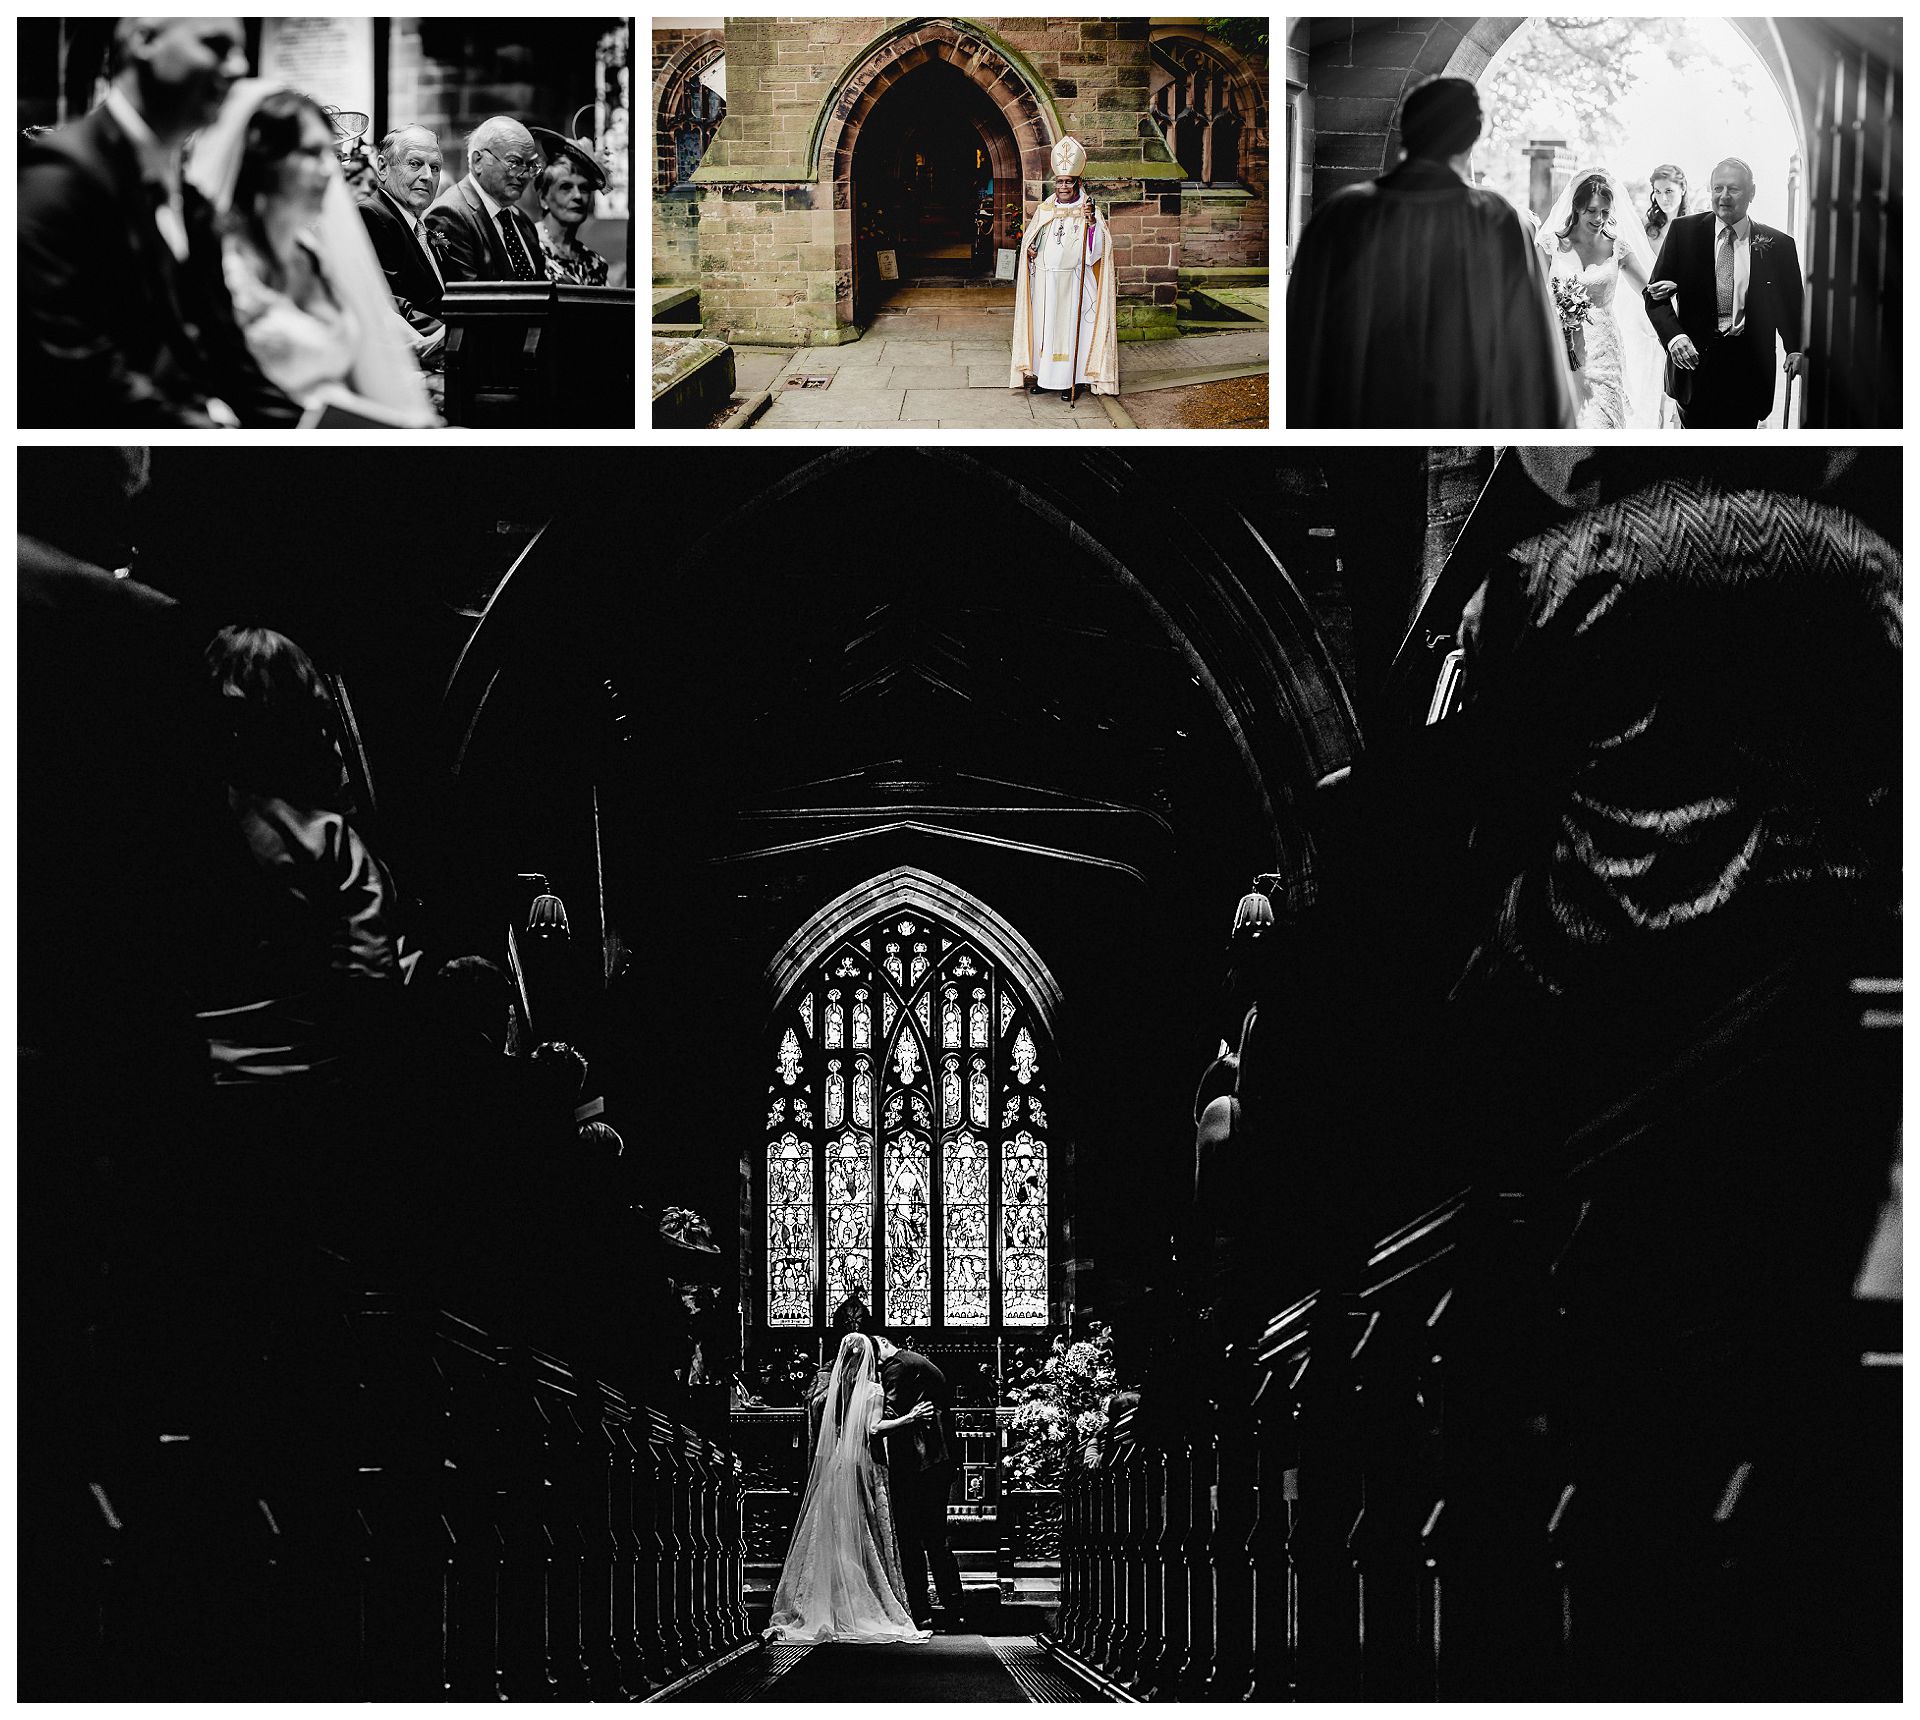 photographs from inside the church during the wedding service